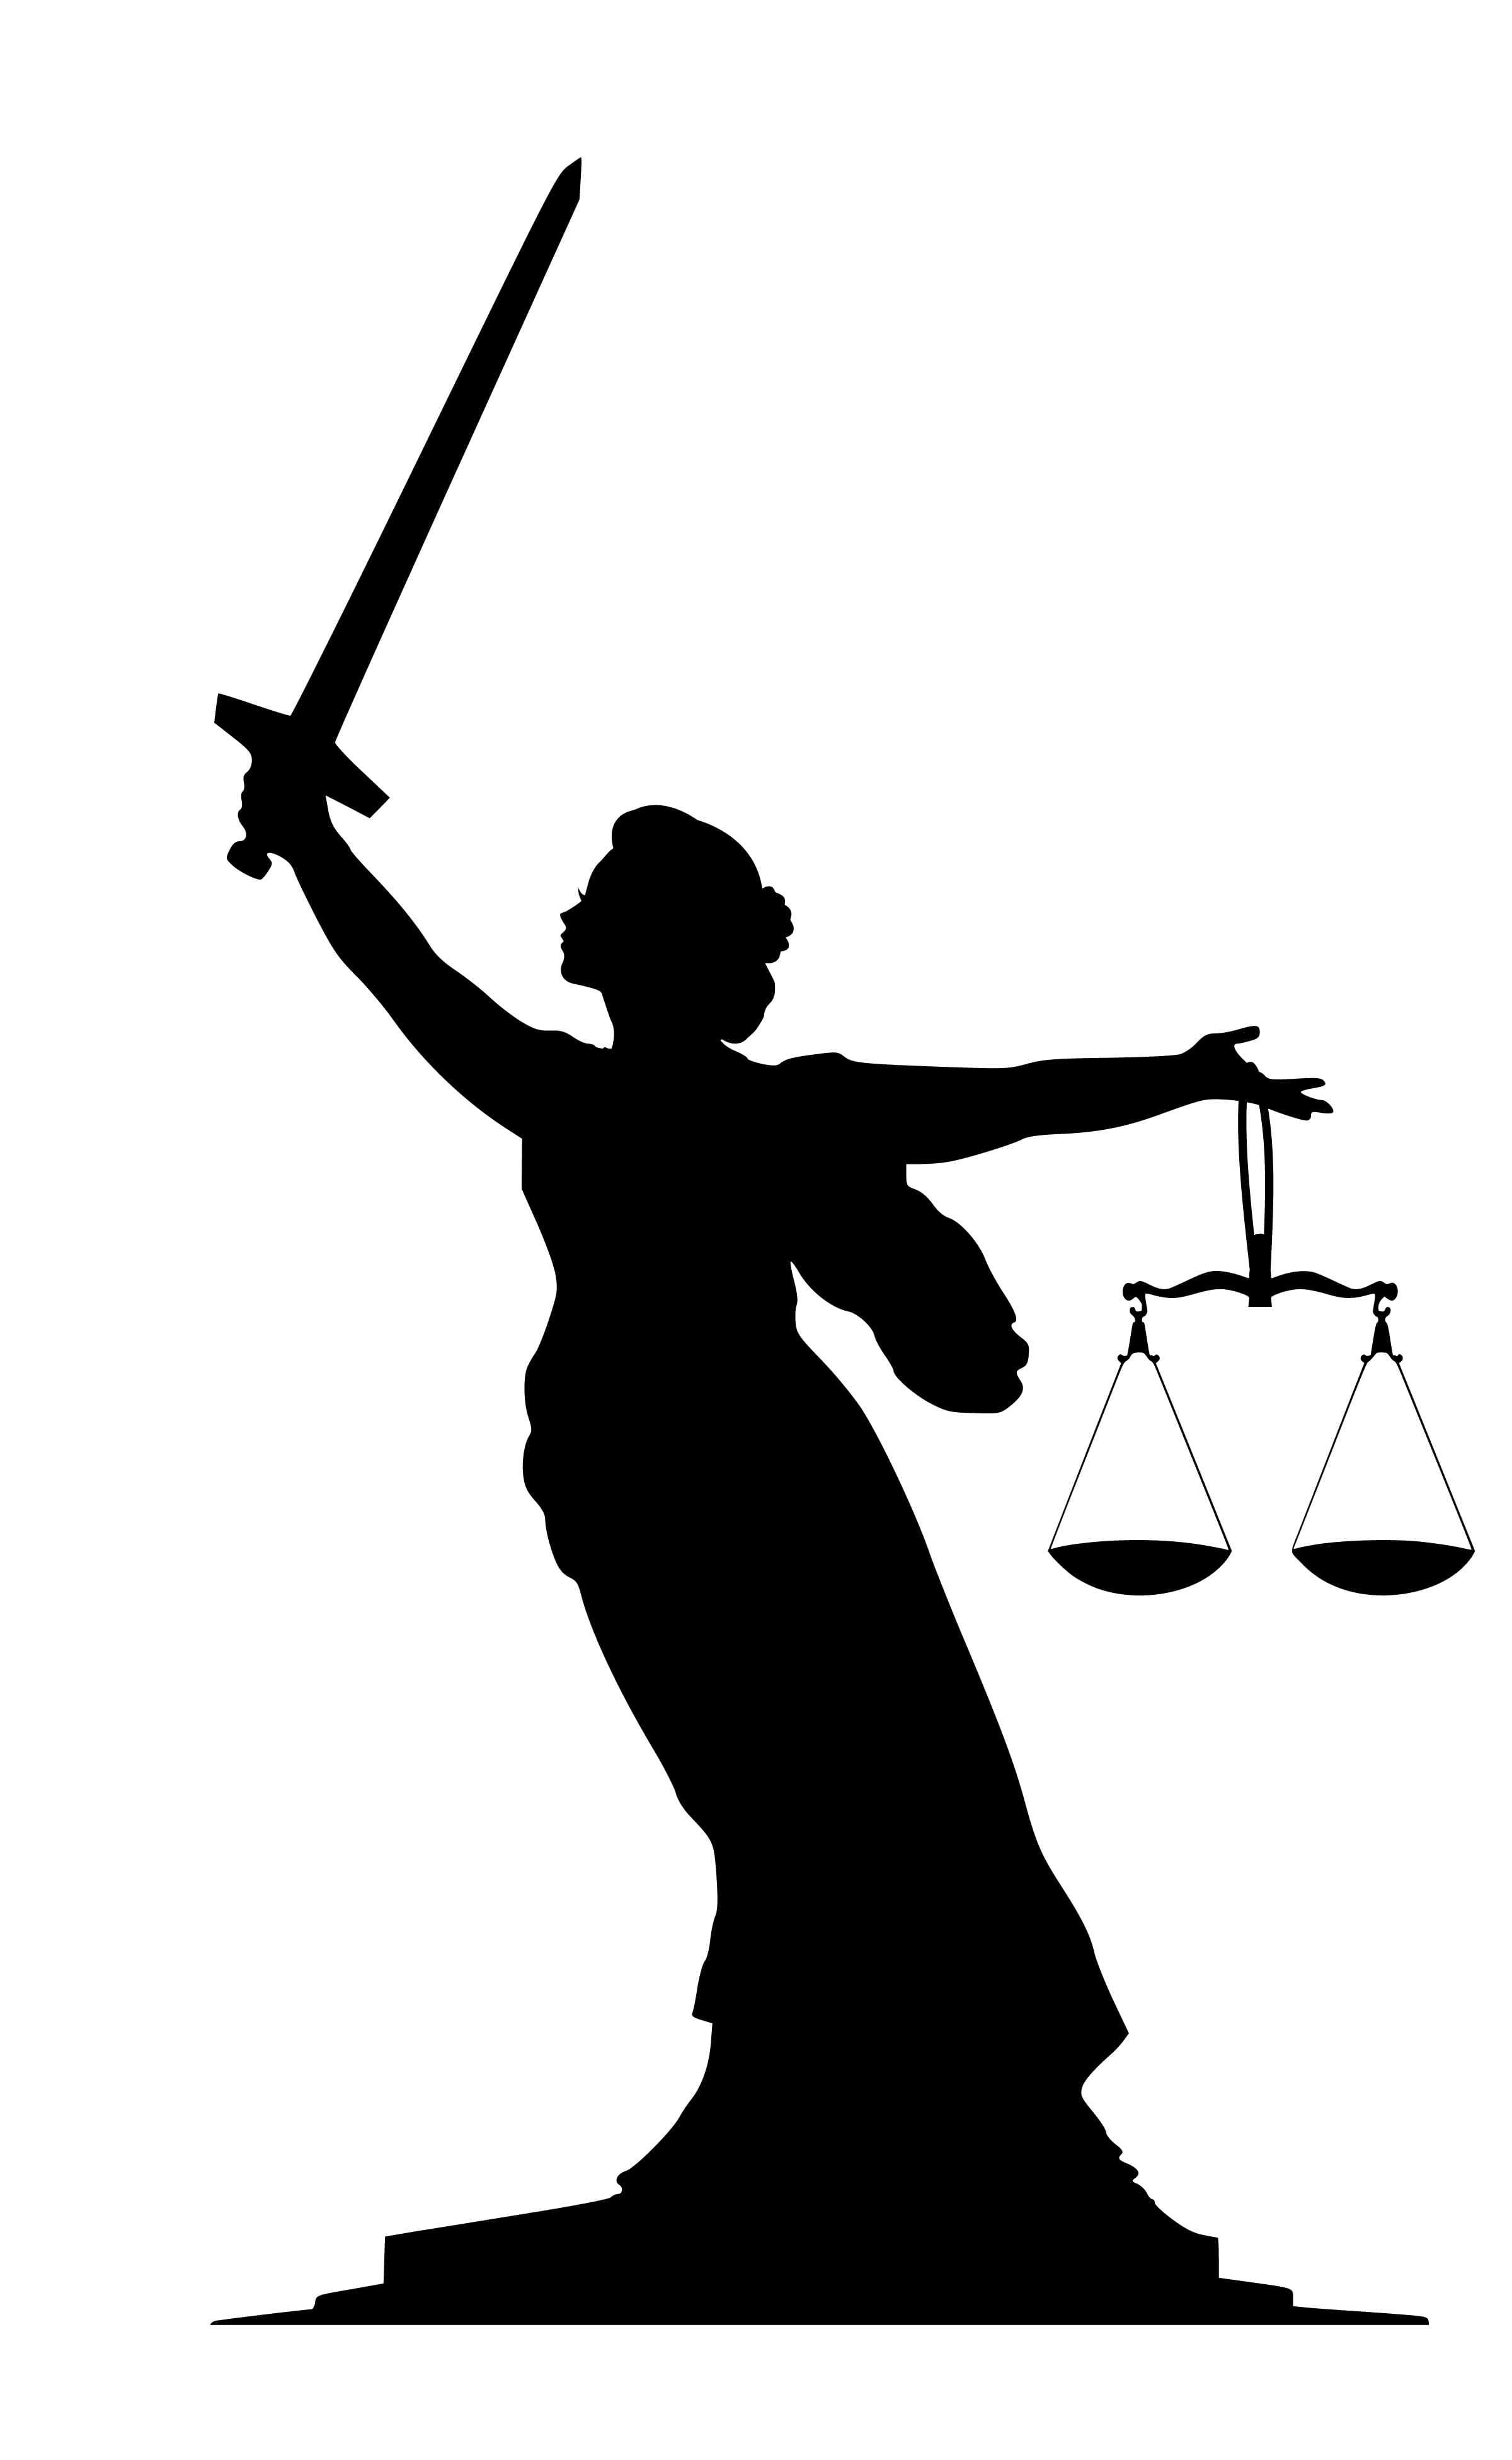 Silhouette of lady justice with raised sword., legal, scales